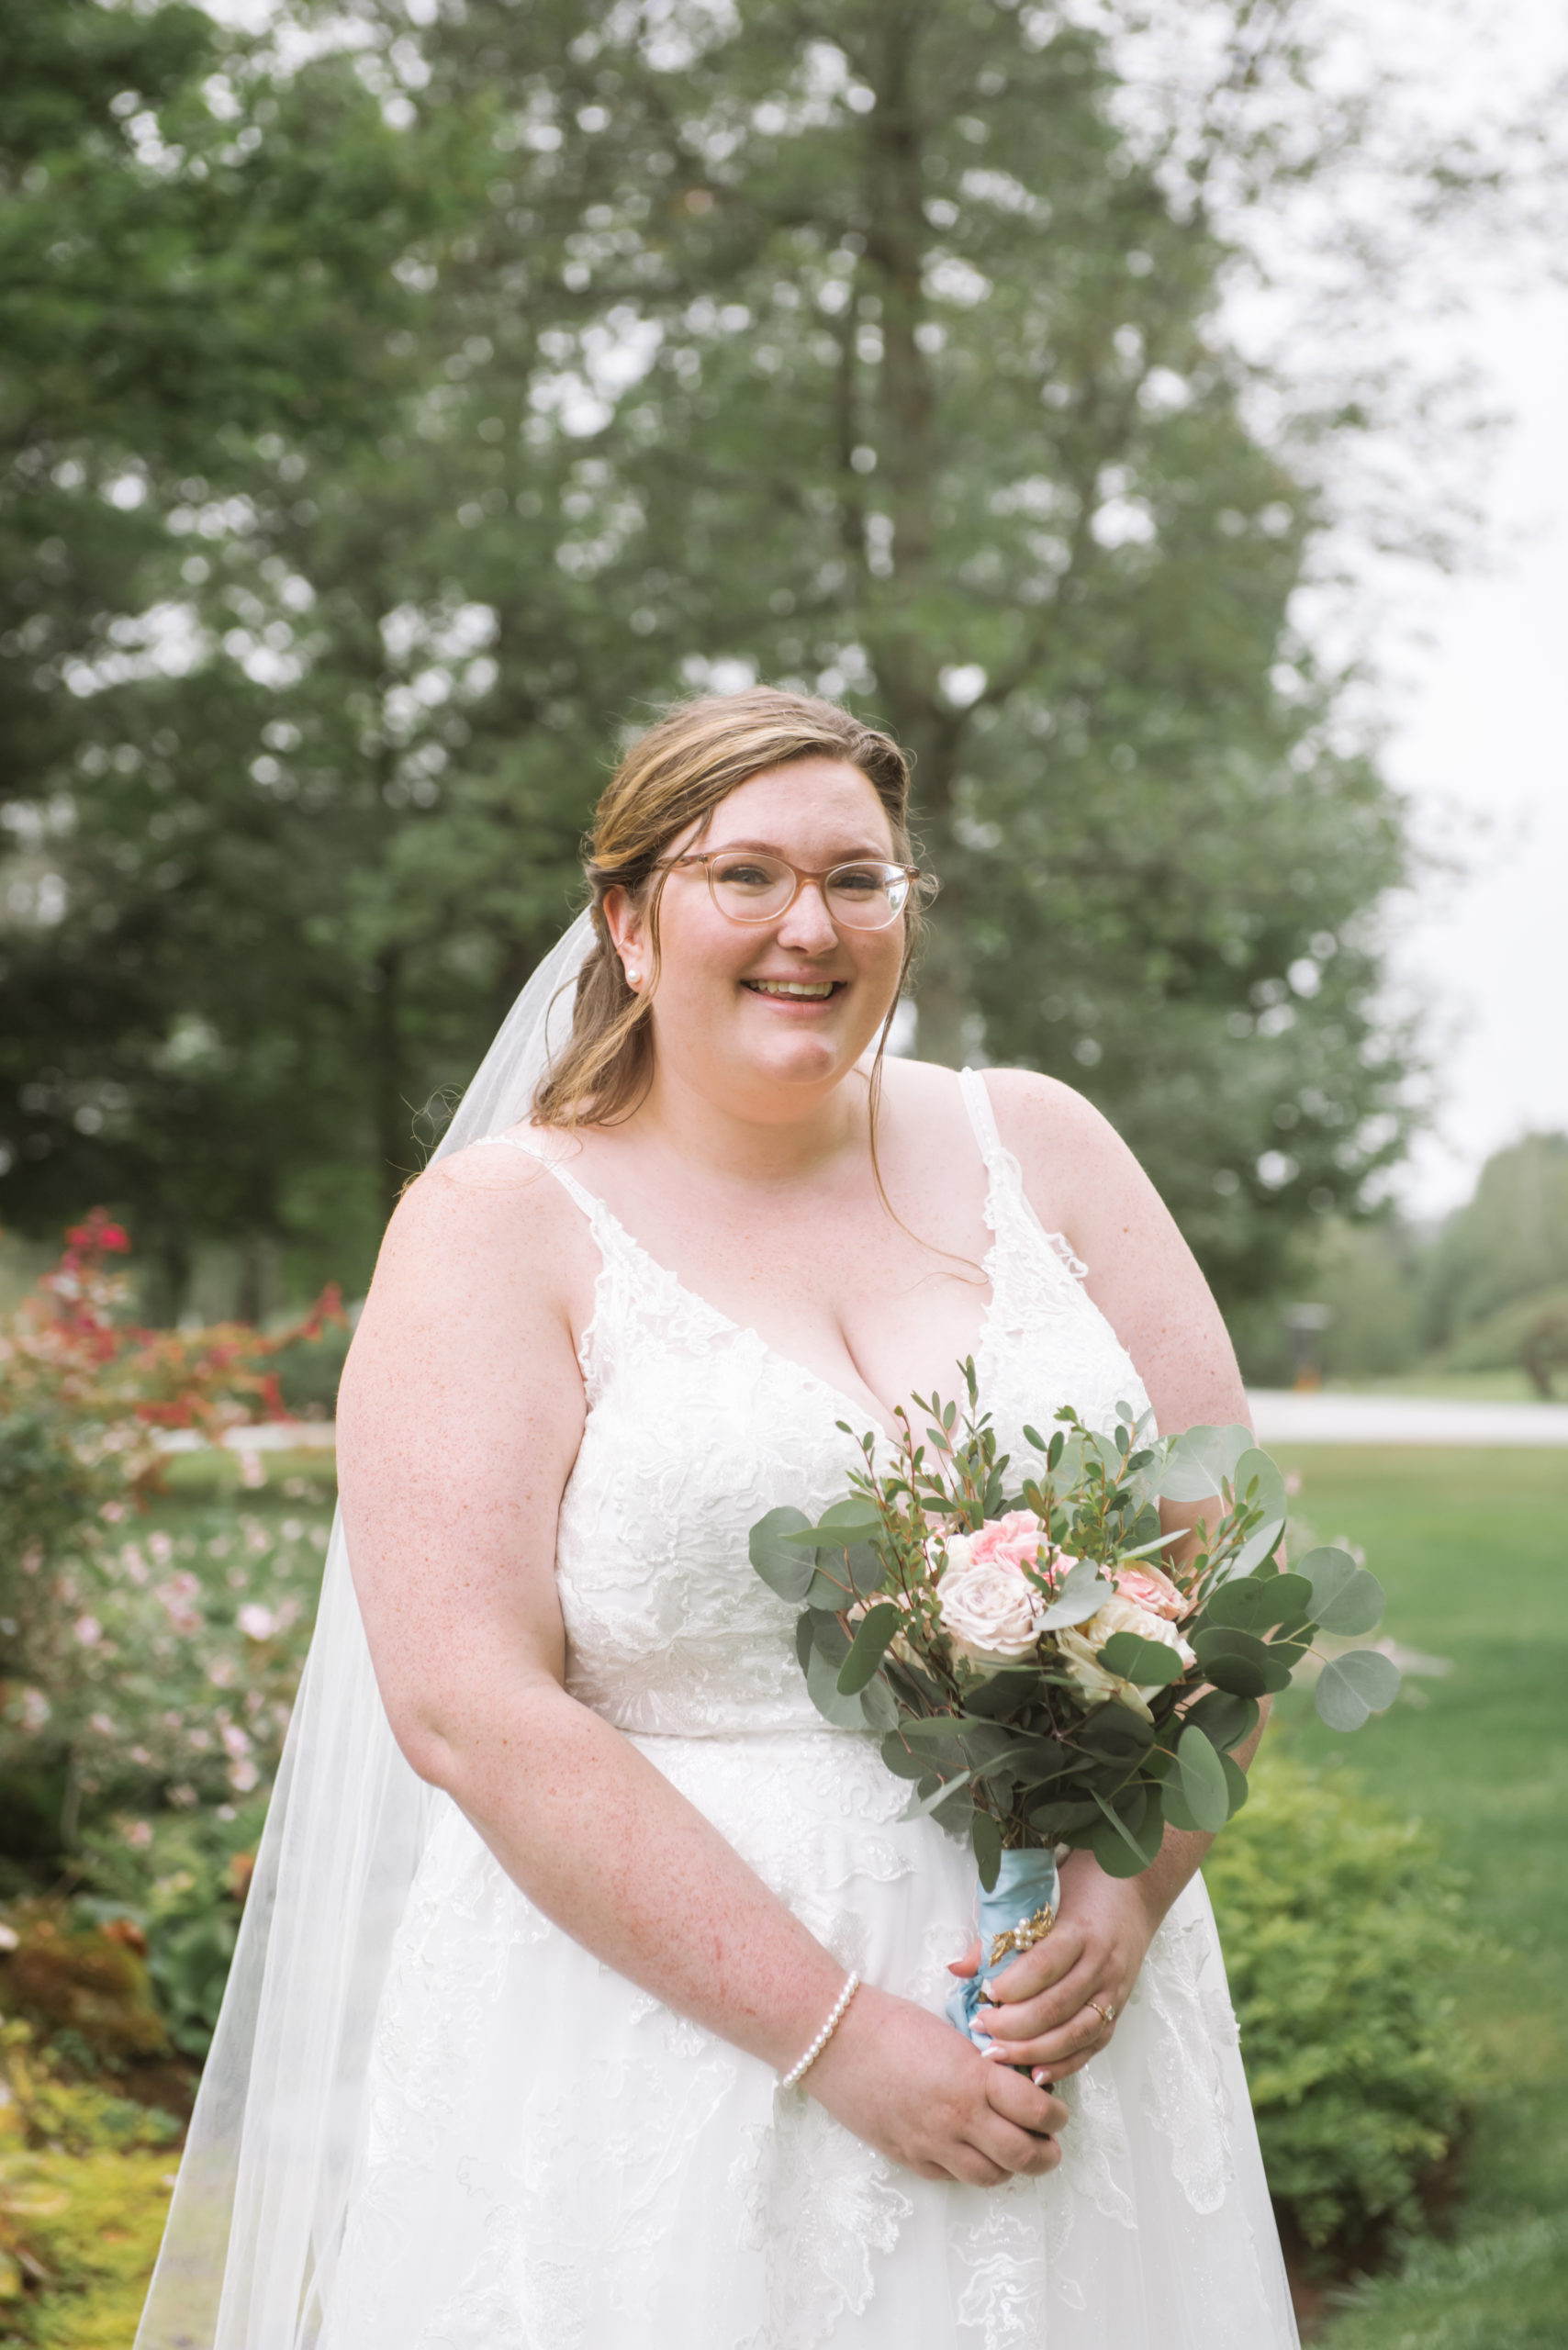 Torso portrait of the bride standing in a garden. She is holding her bouquet in front of her. She is wearing a long white lace gown with a long veil. She is smiling straight to camera and is wearing glasses.